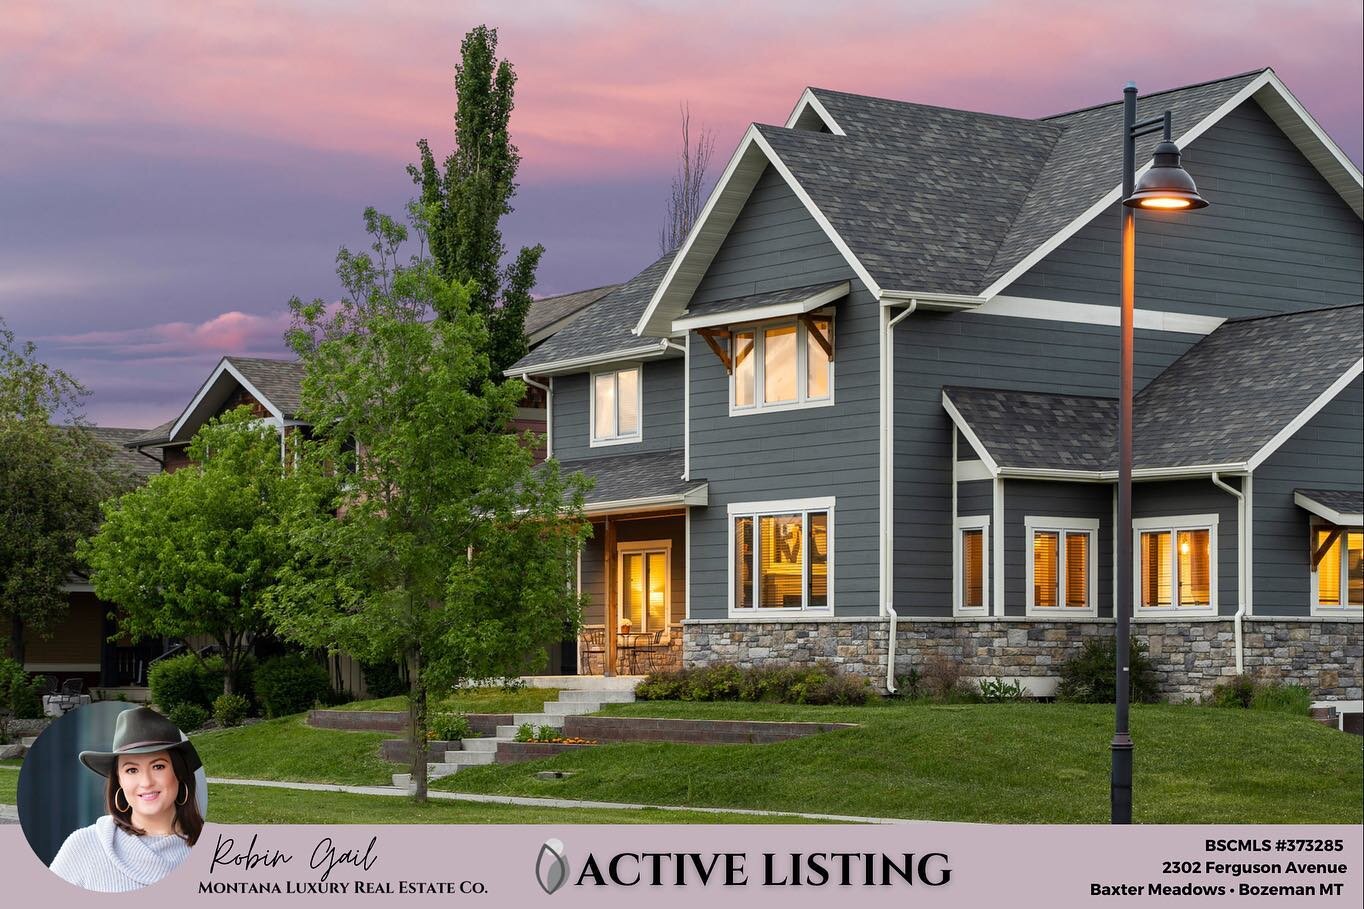 Active listing!

🔑An expansive 6 bedroom offering with 3 living areas, in Baxter Meadows, on a spacious .22 acre corner lot with Owner's Suite on the main level! 

🙌🏻Soaring ceiling in the contemporary living area with a cozy gas fireplace. 

🛏Ow